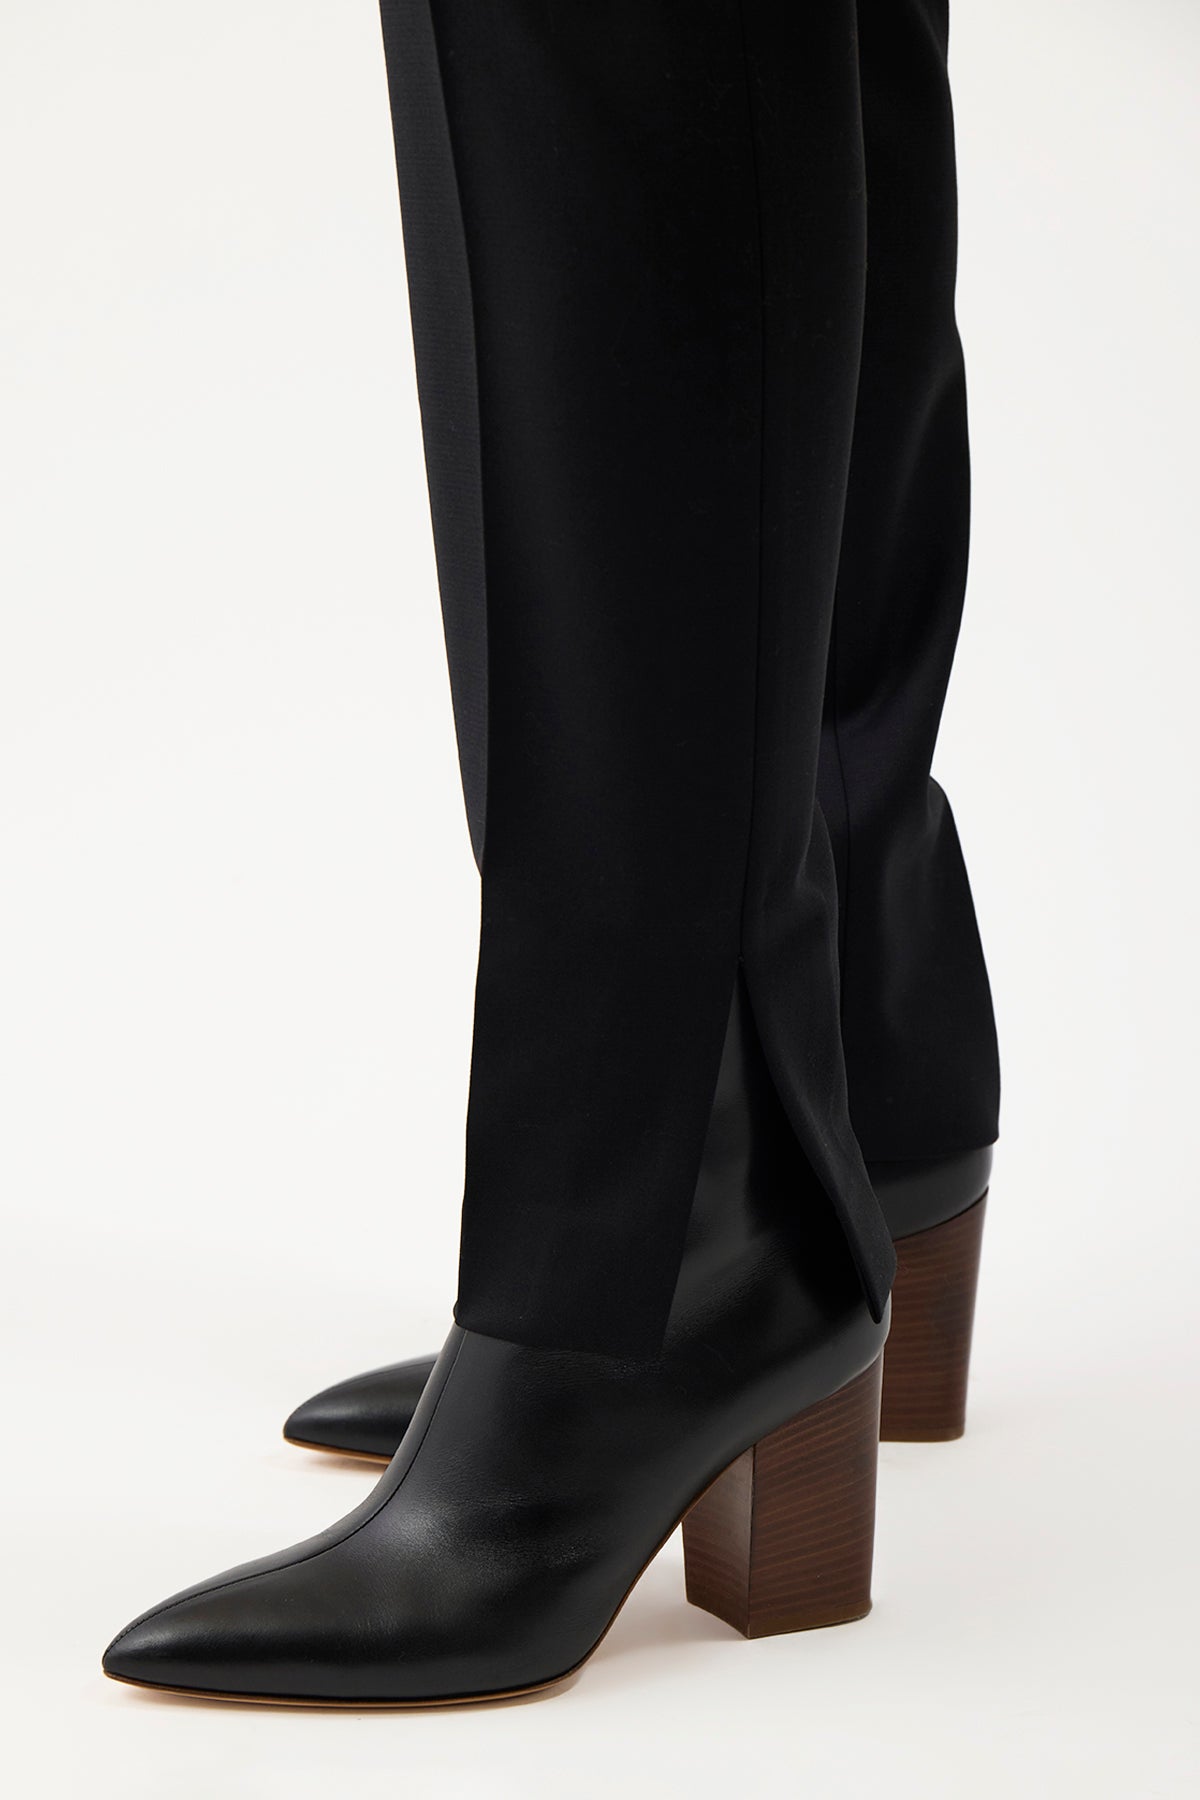 Rio Heeled Boot in Black Leather